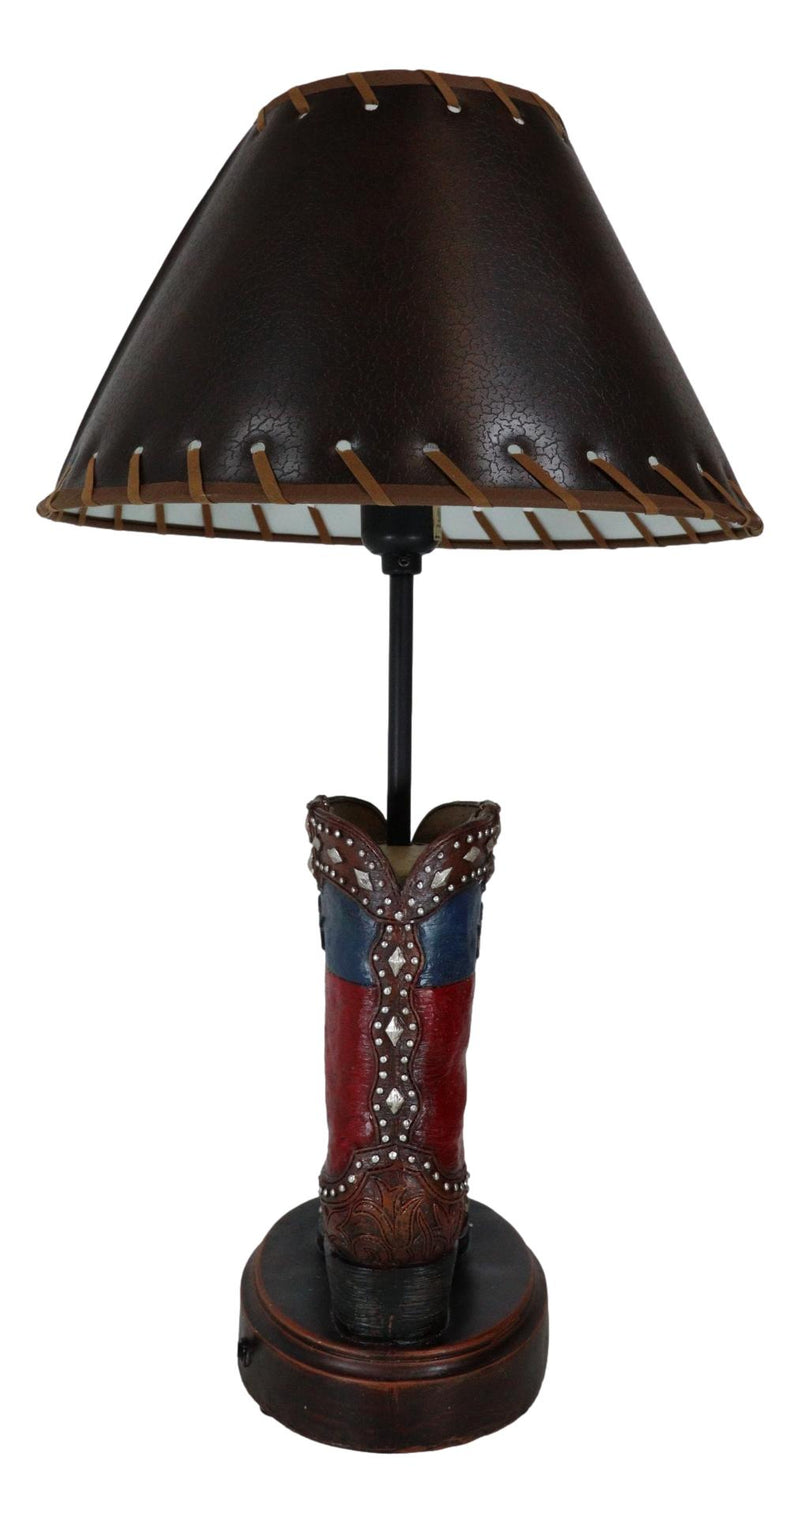 Western Floral Tooled Leather Texas State Flag Cowboy Boot Desktop Table Lamp